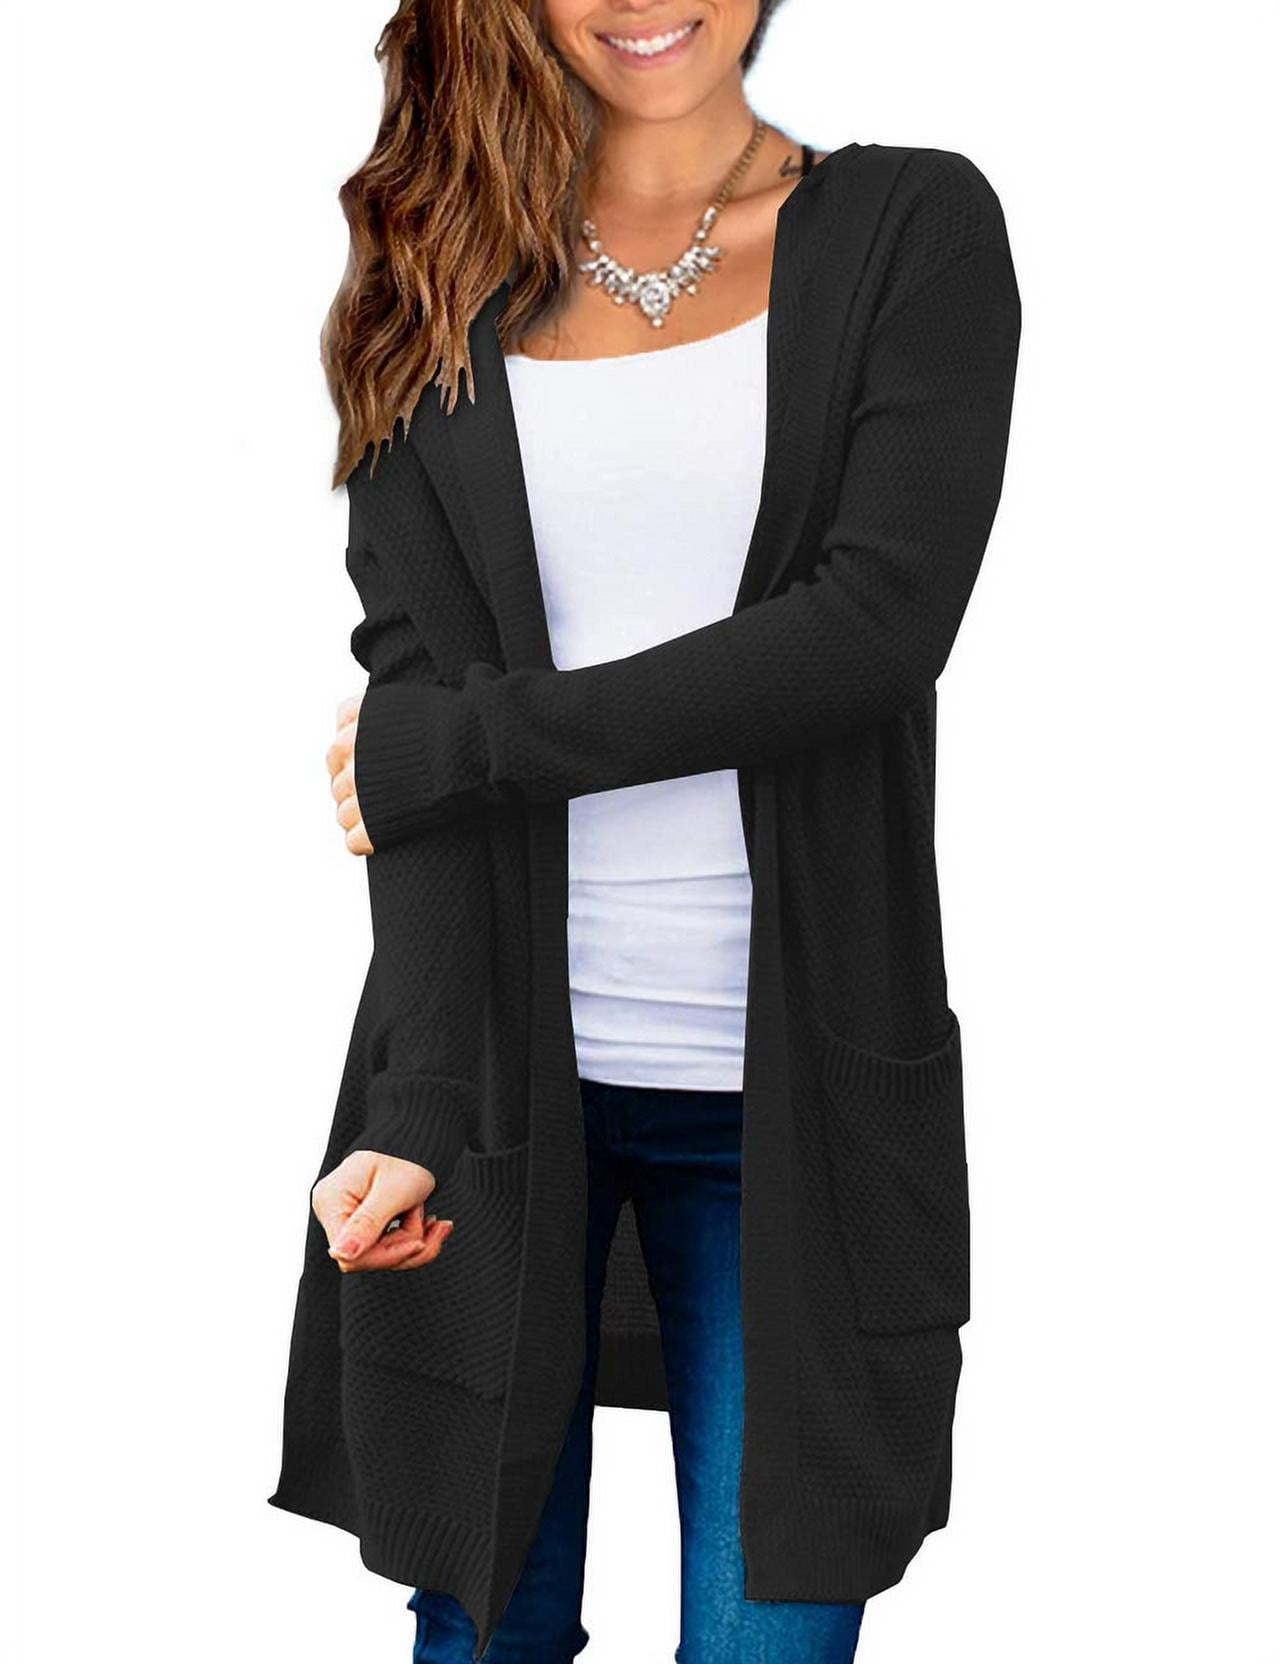 FOLUNSI Women's Open Front Cardigan Hoodie Sweaters with Pockets S-XL ...